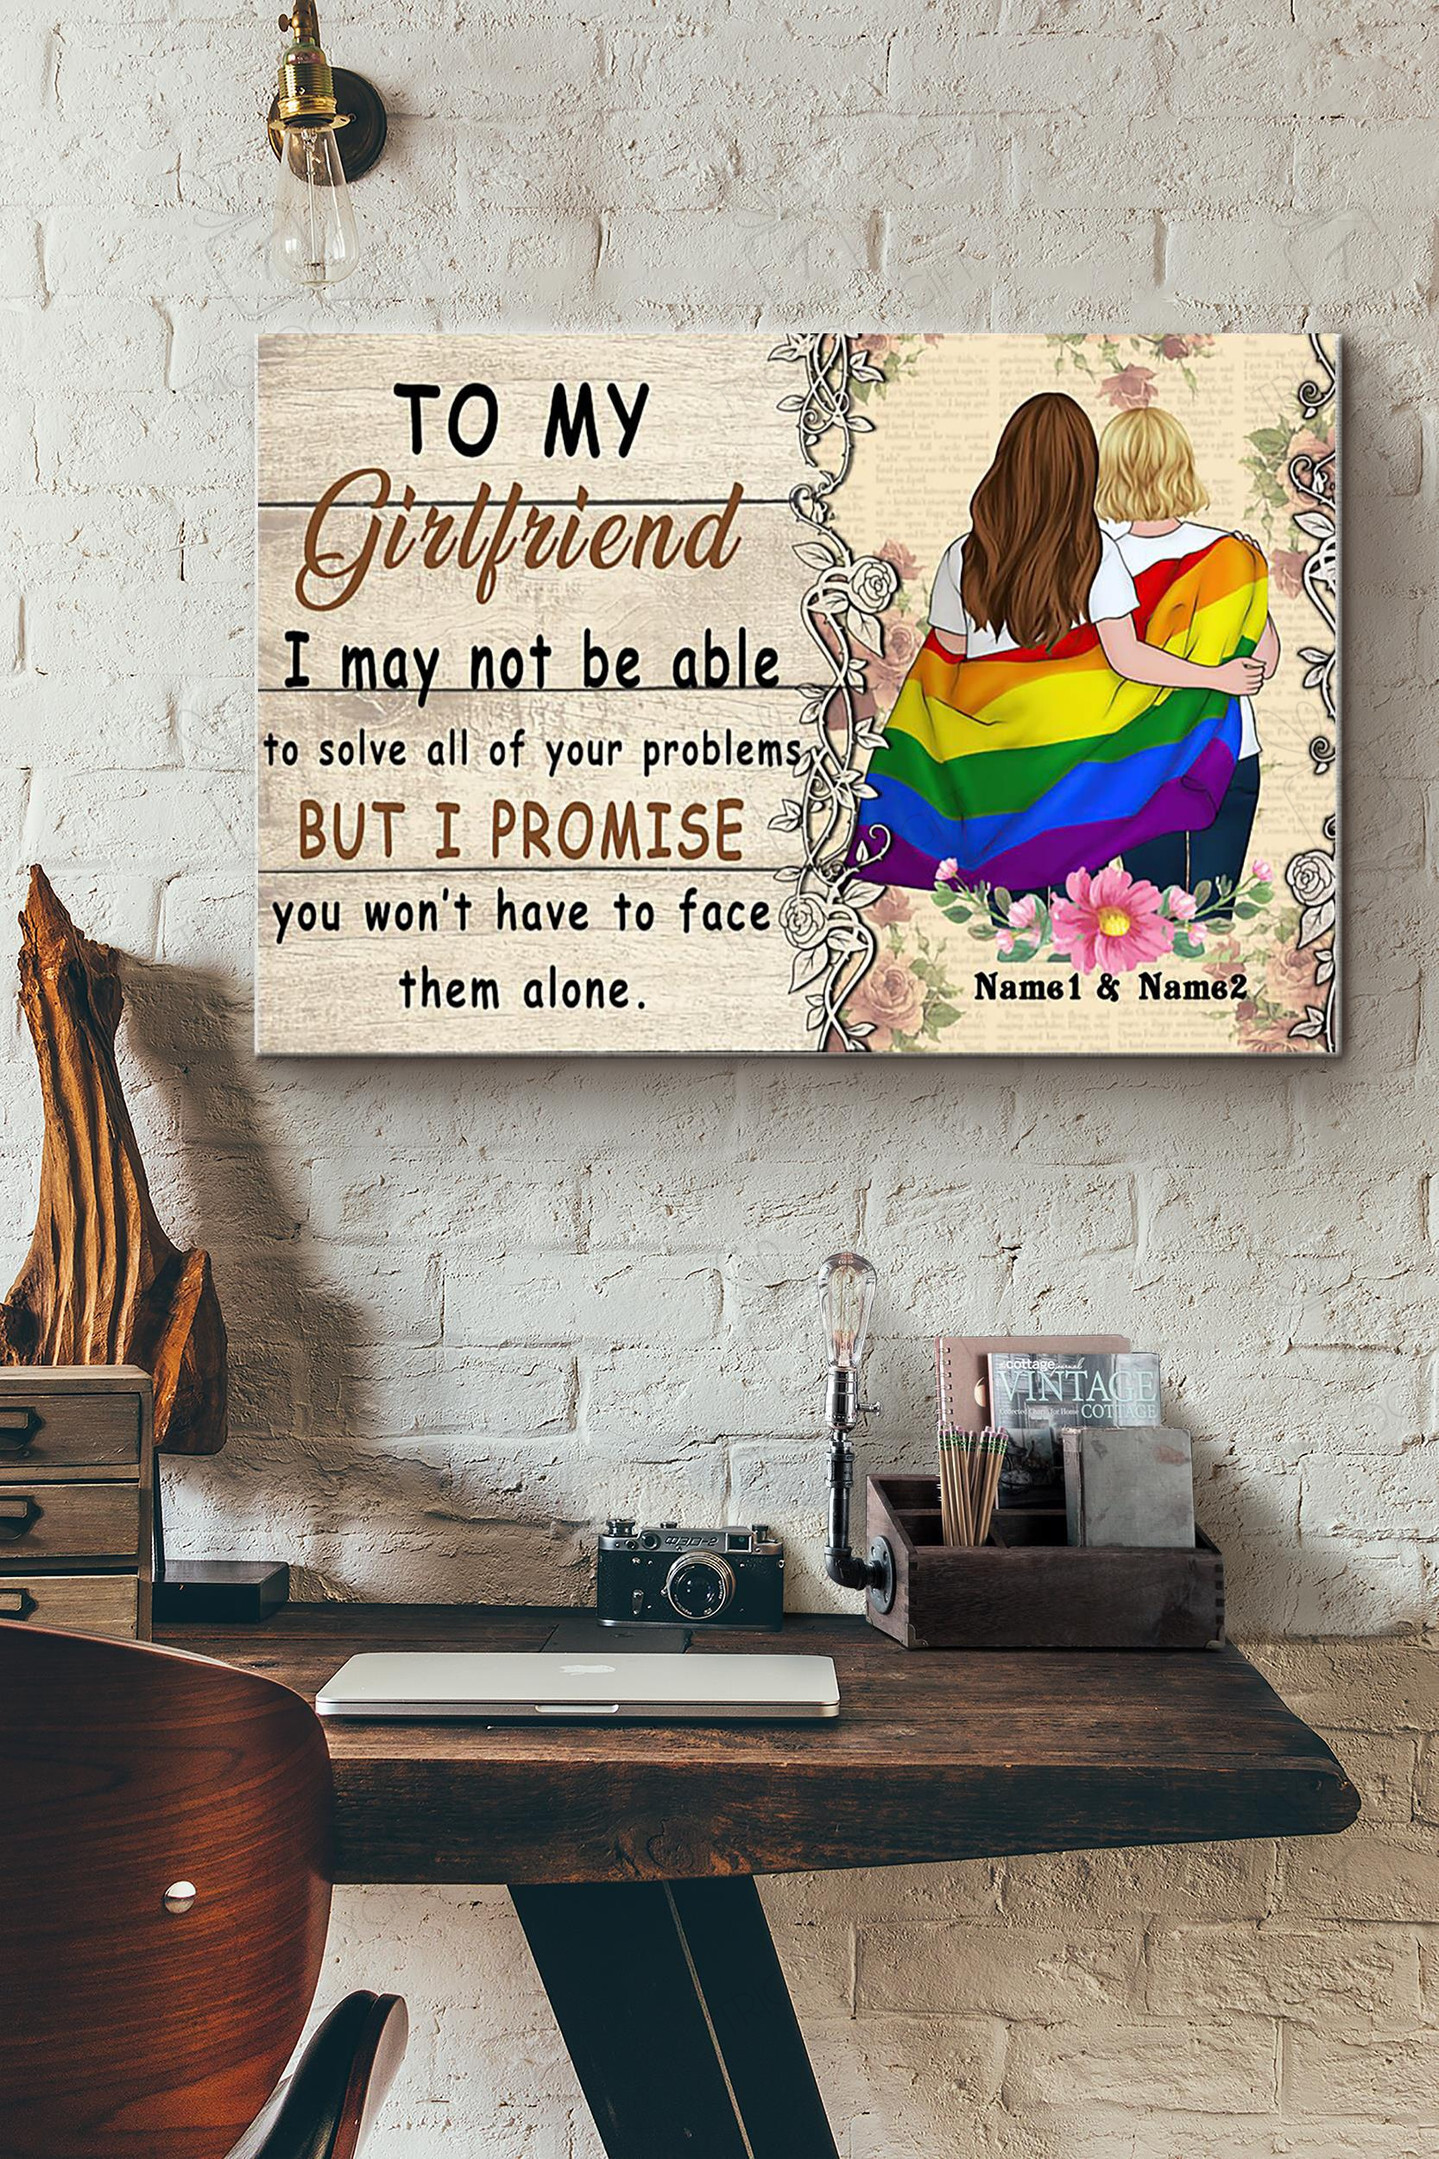 To My Girlfriend I May Not Be Able To Solve All Of Your Problems But I Promise You Wont Have To Face Them Alone Lesbian Couple Canvas Painting Ideas, Canvas Hanging Prints, Gift Idea Framed Prints, Canvas Paintings Wrapped Canvas 8x10